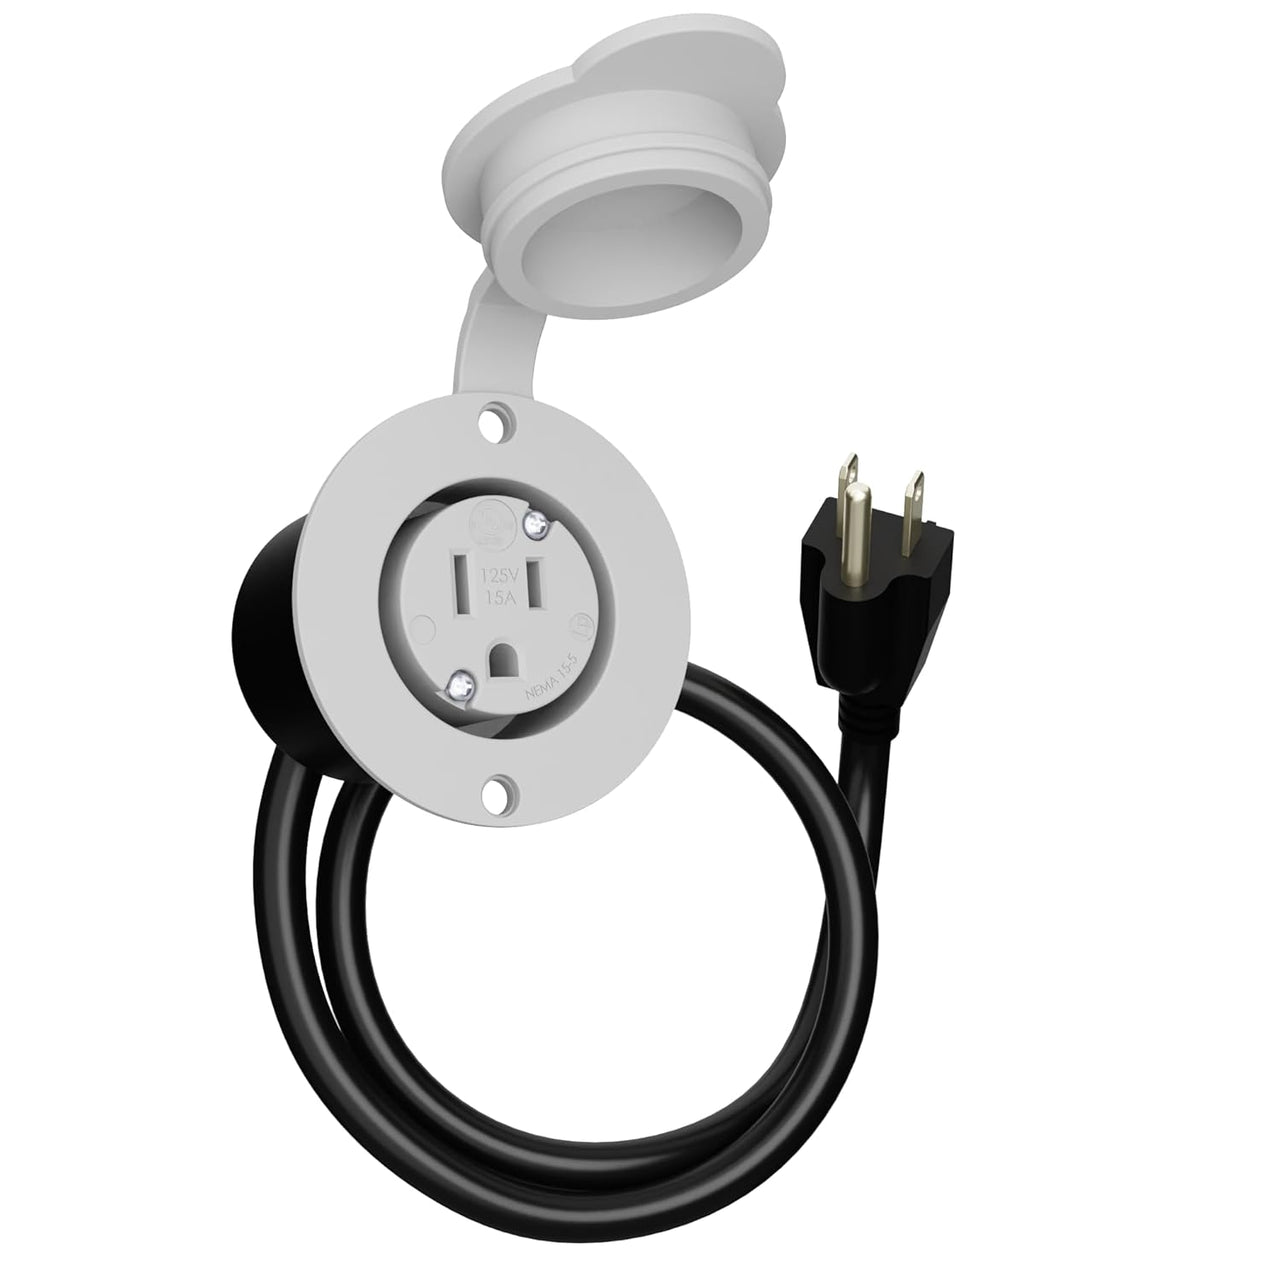 15 AMP - 125 VOLT - FLANGED POWER OUTLET PORT PLUG (NEMA 5-15R) White w/ 10' FT Extension Cord + Waterproof Cover (HJP-5279-GCR1-W10)